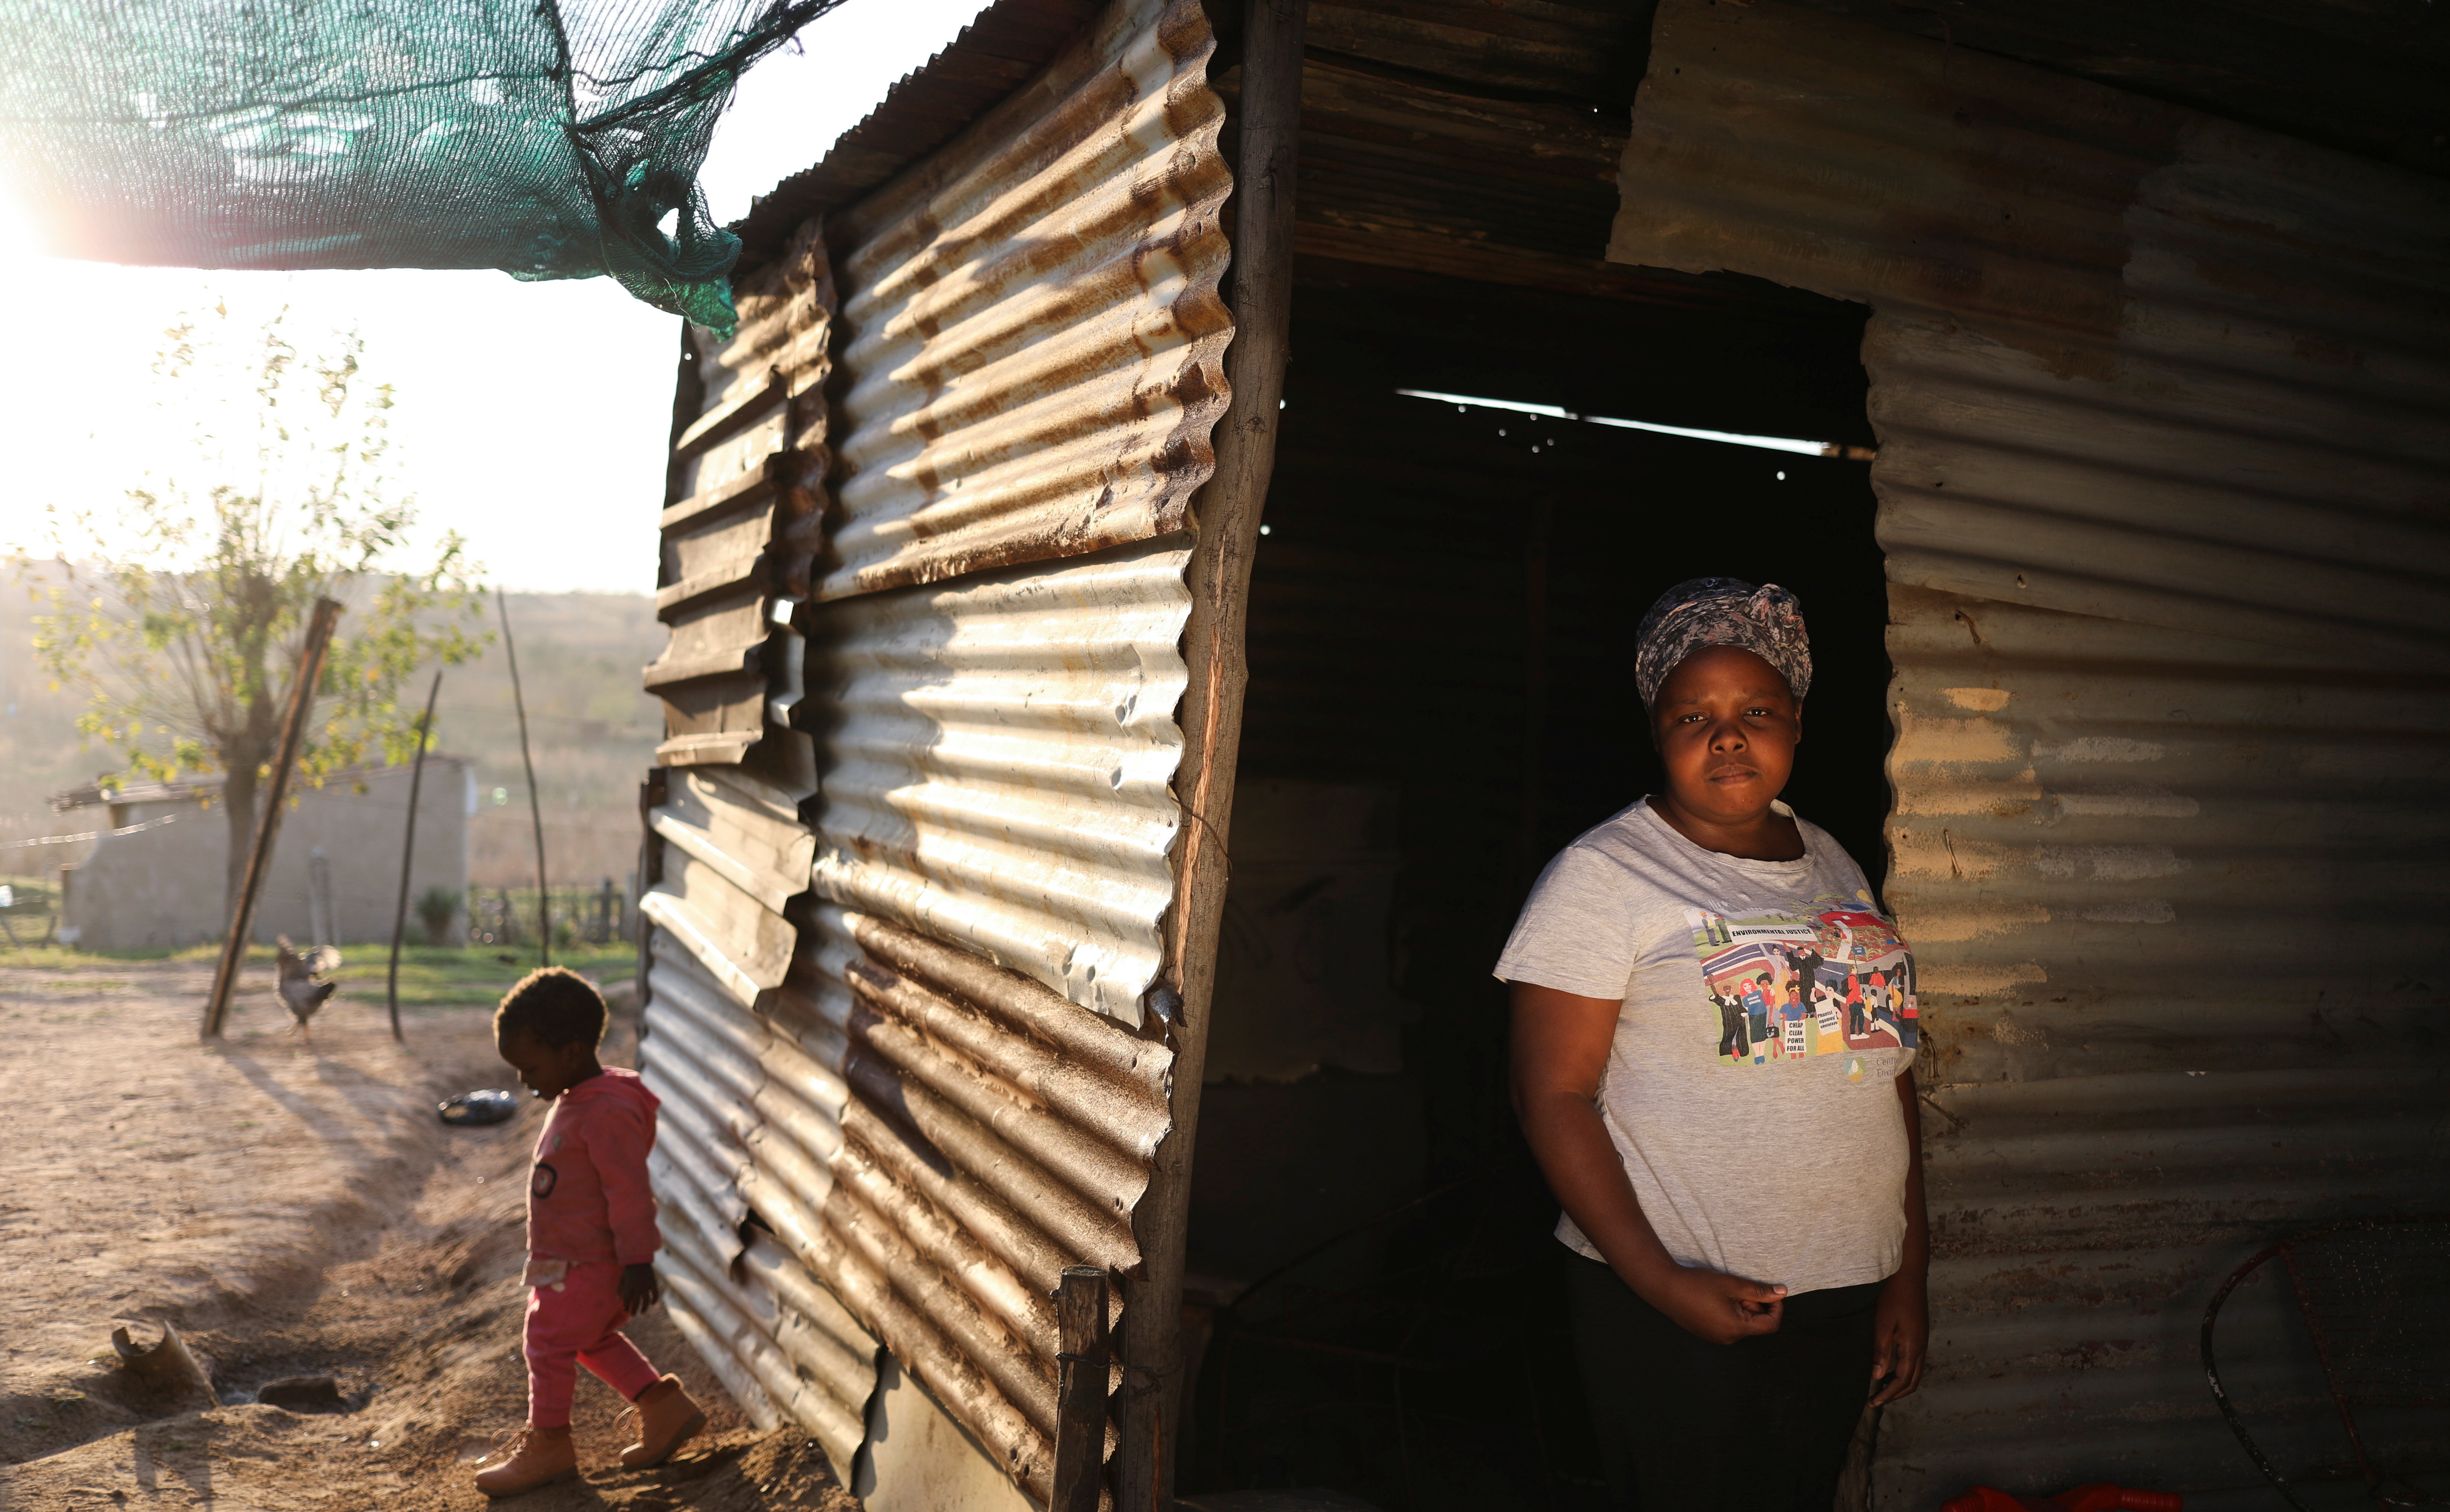 Mbali Matabule, poses for a photograph while her daughter Asemahle looks on at their home in Emalahleni, in Mpumalanga province, South Africa, June 2, 2021. REUTERS/Siphiwe Sibeko